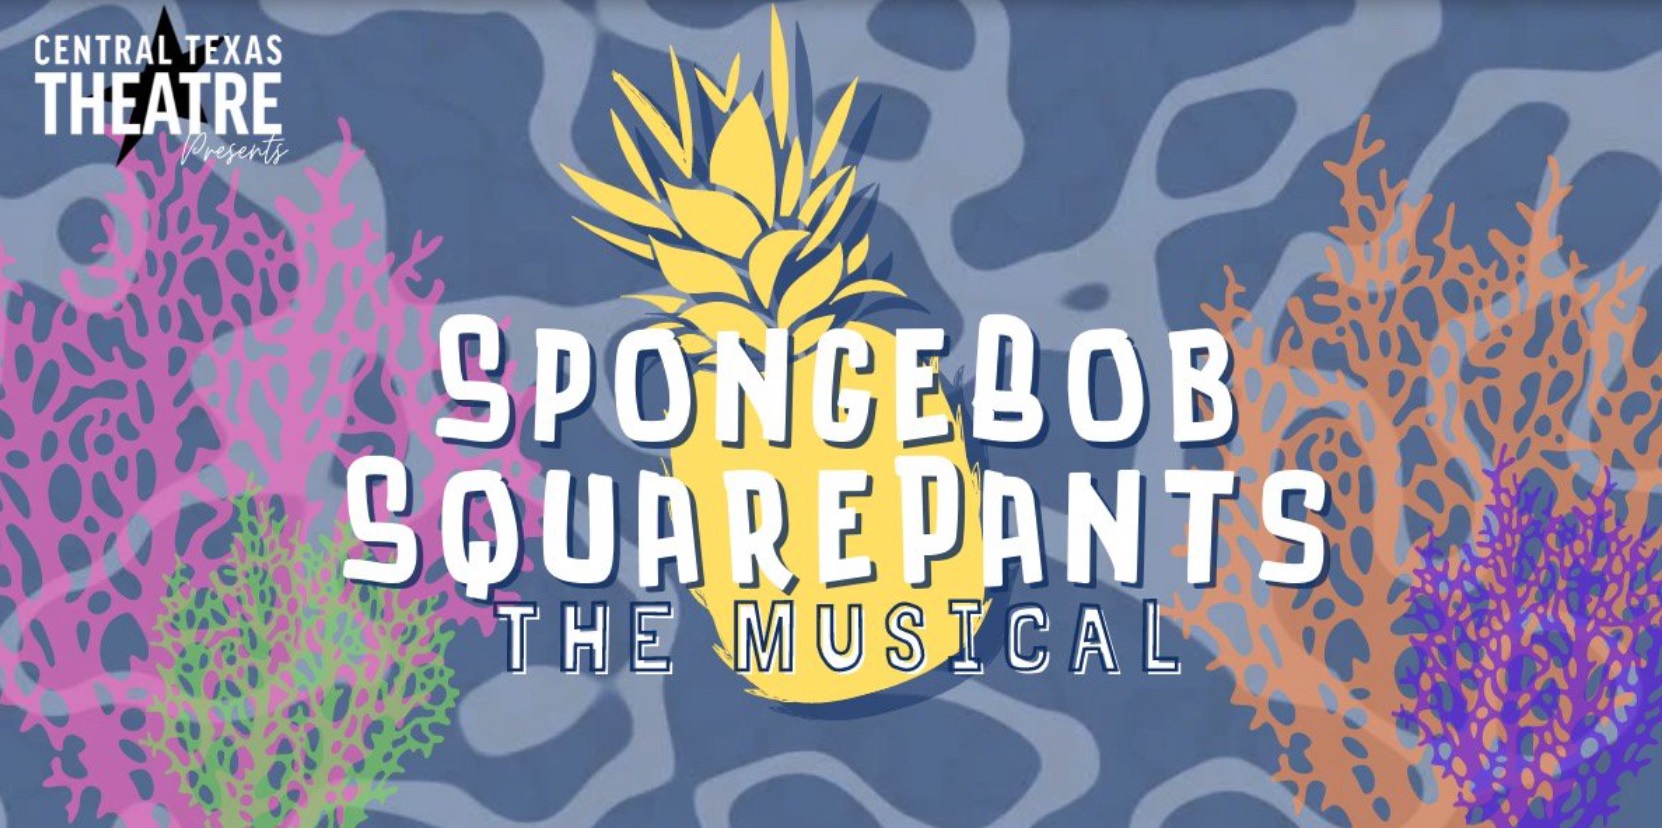 Spongebob Squarepants, the musical by Central Texas Theatre (formerly Vive les Arts)